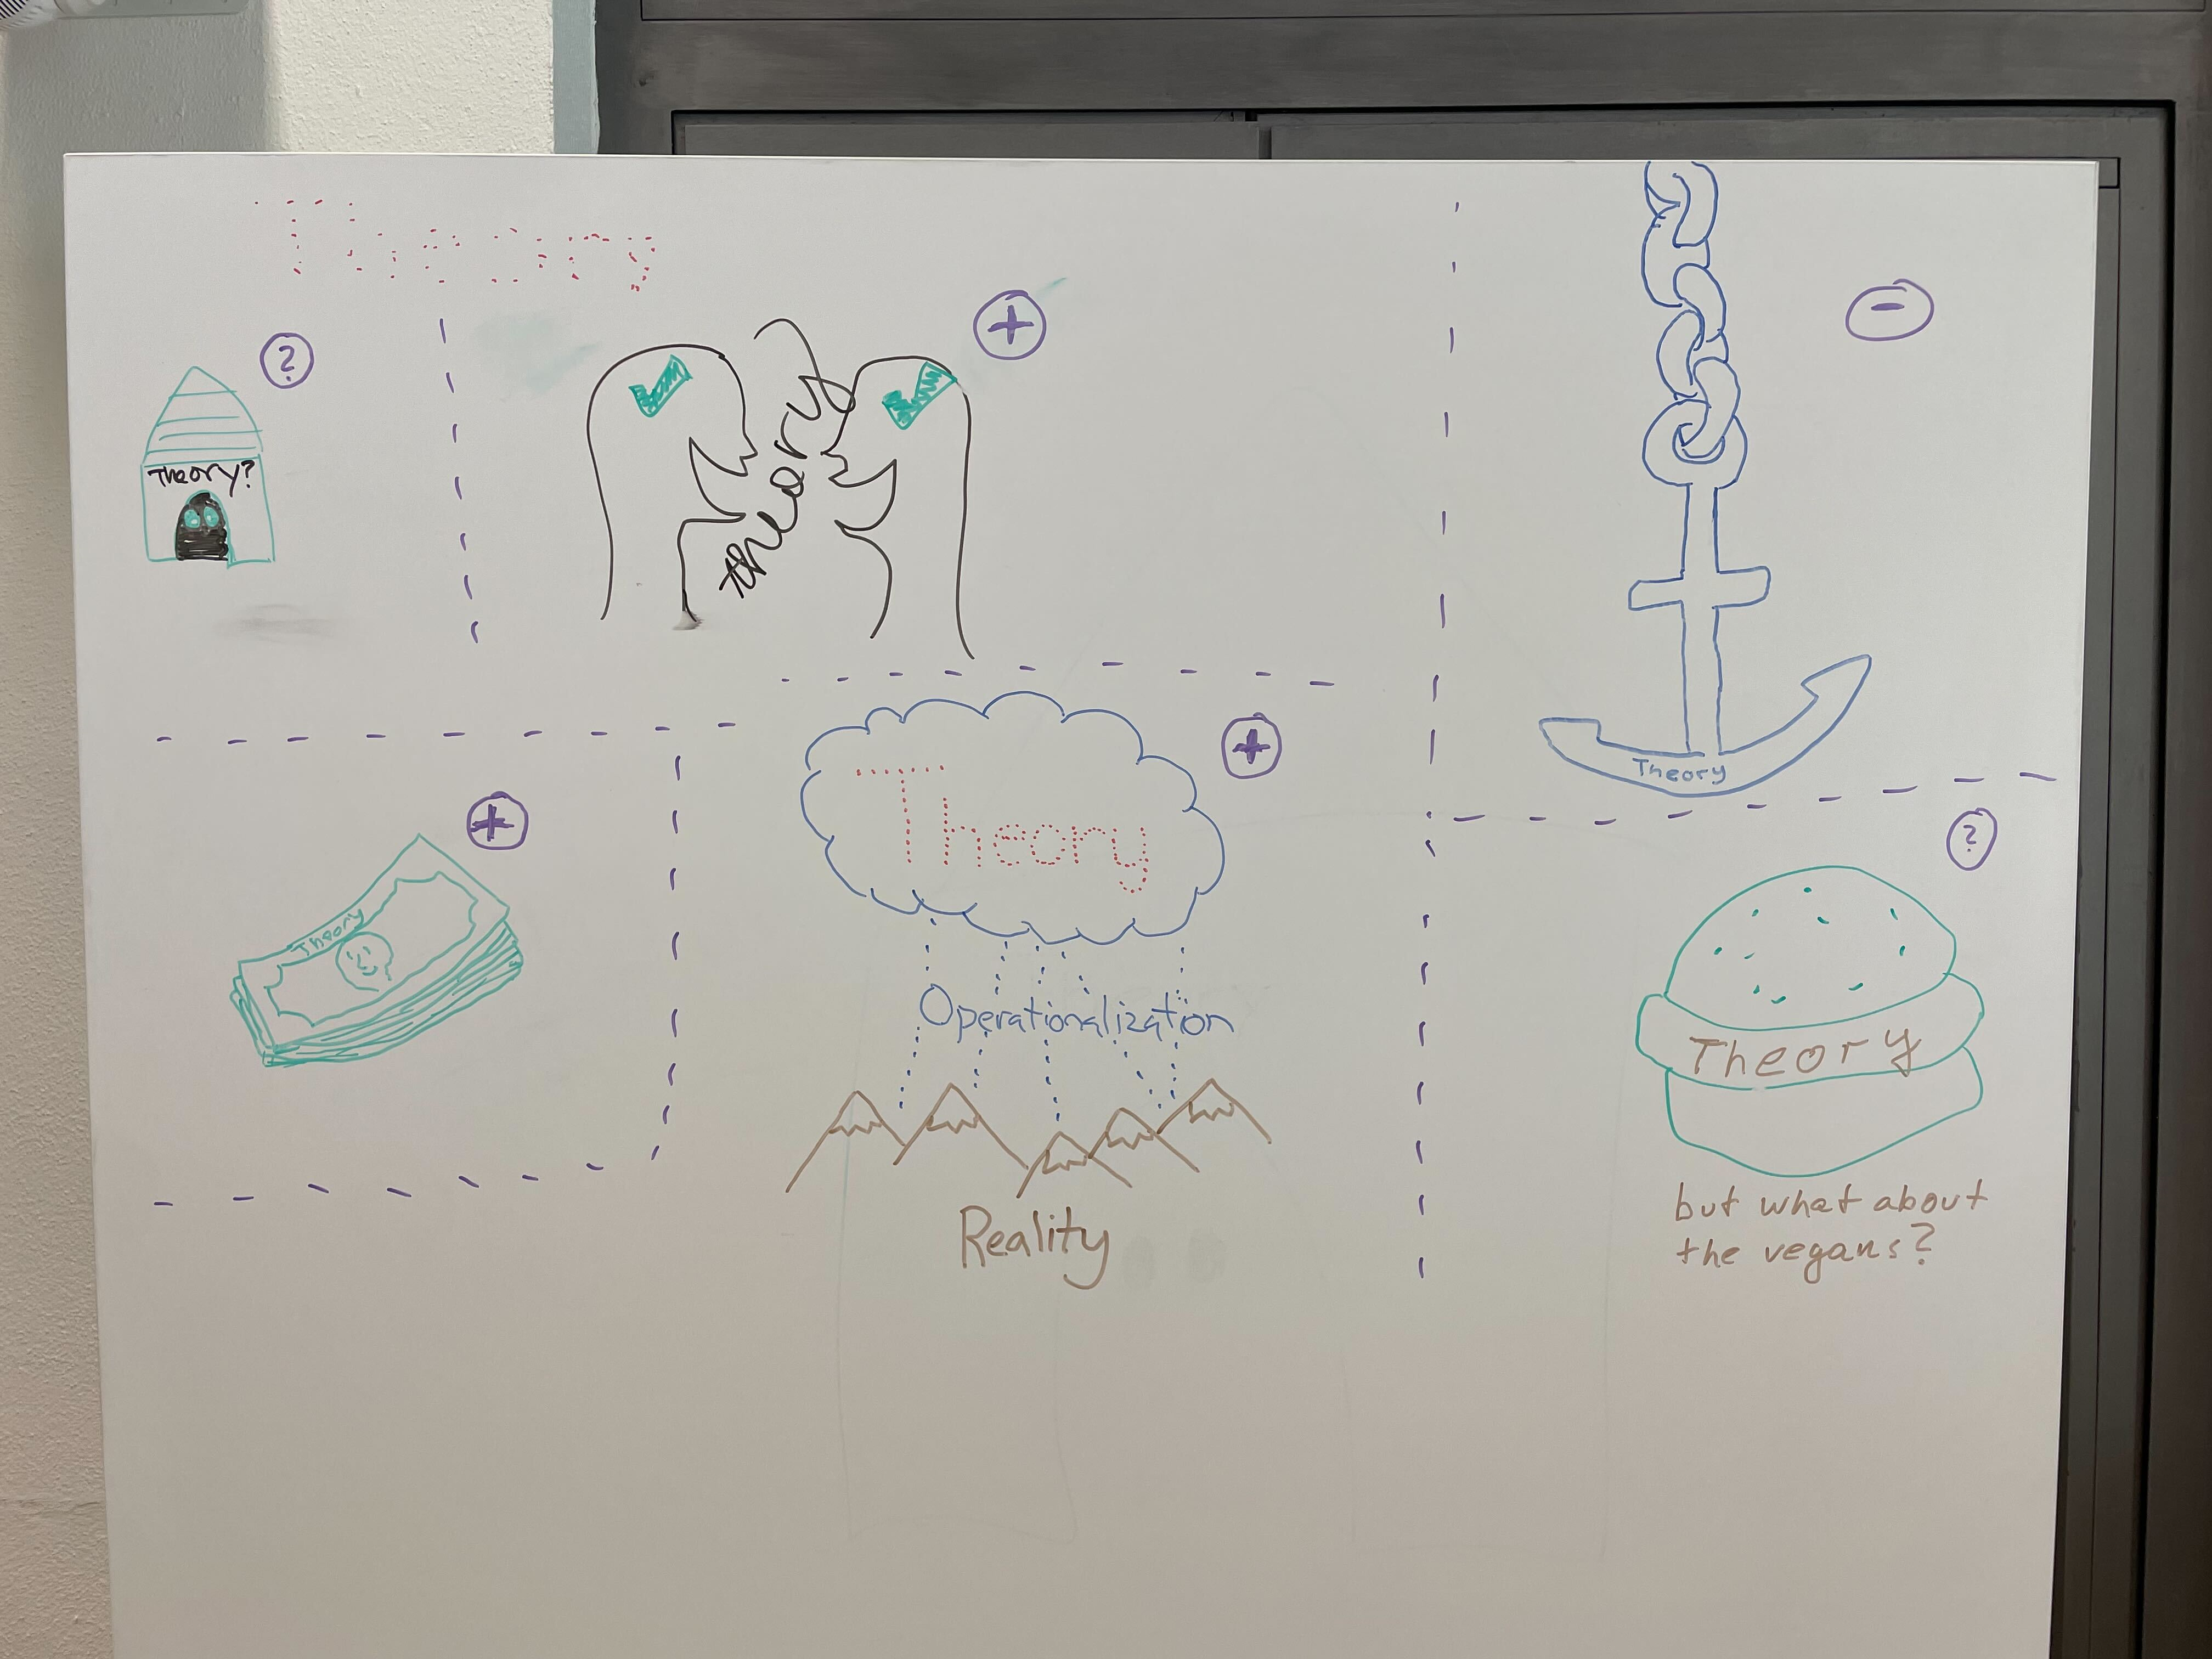 Figure 1 Whiteboard sketches of the pros and cons of theories, as depicted by various diagrams.